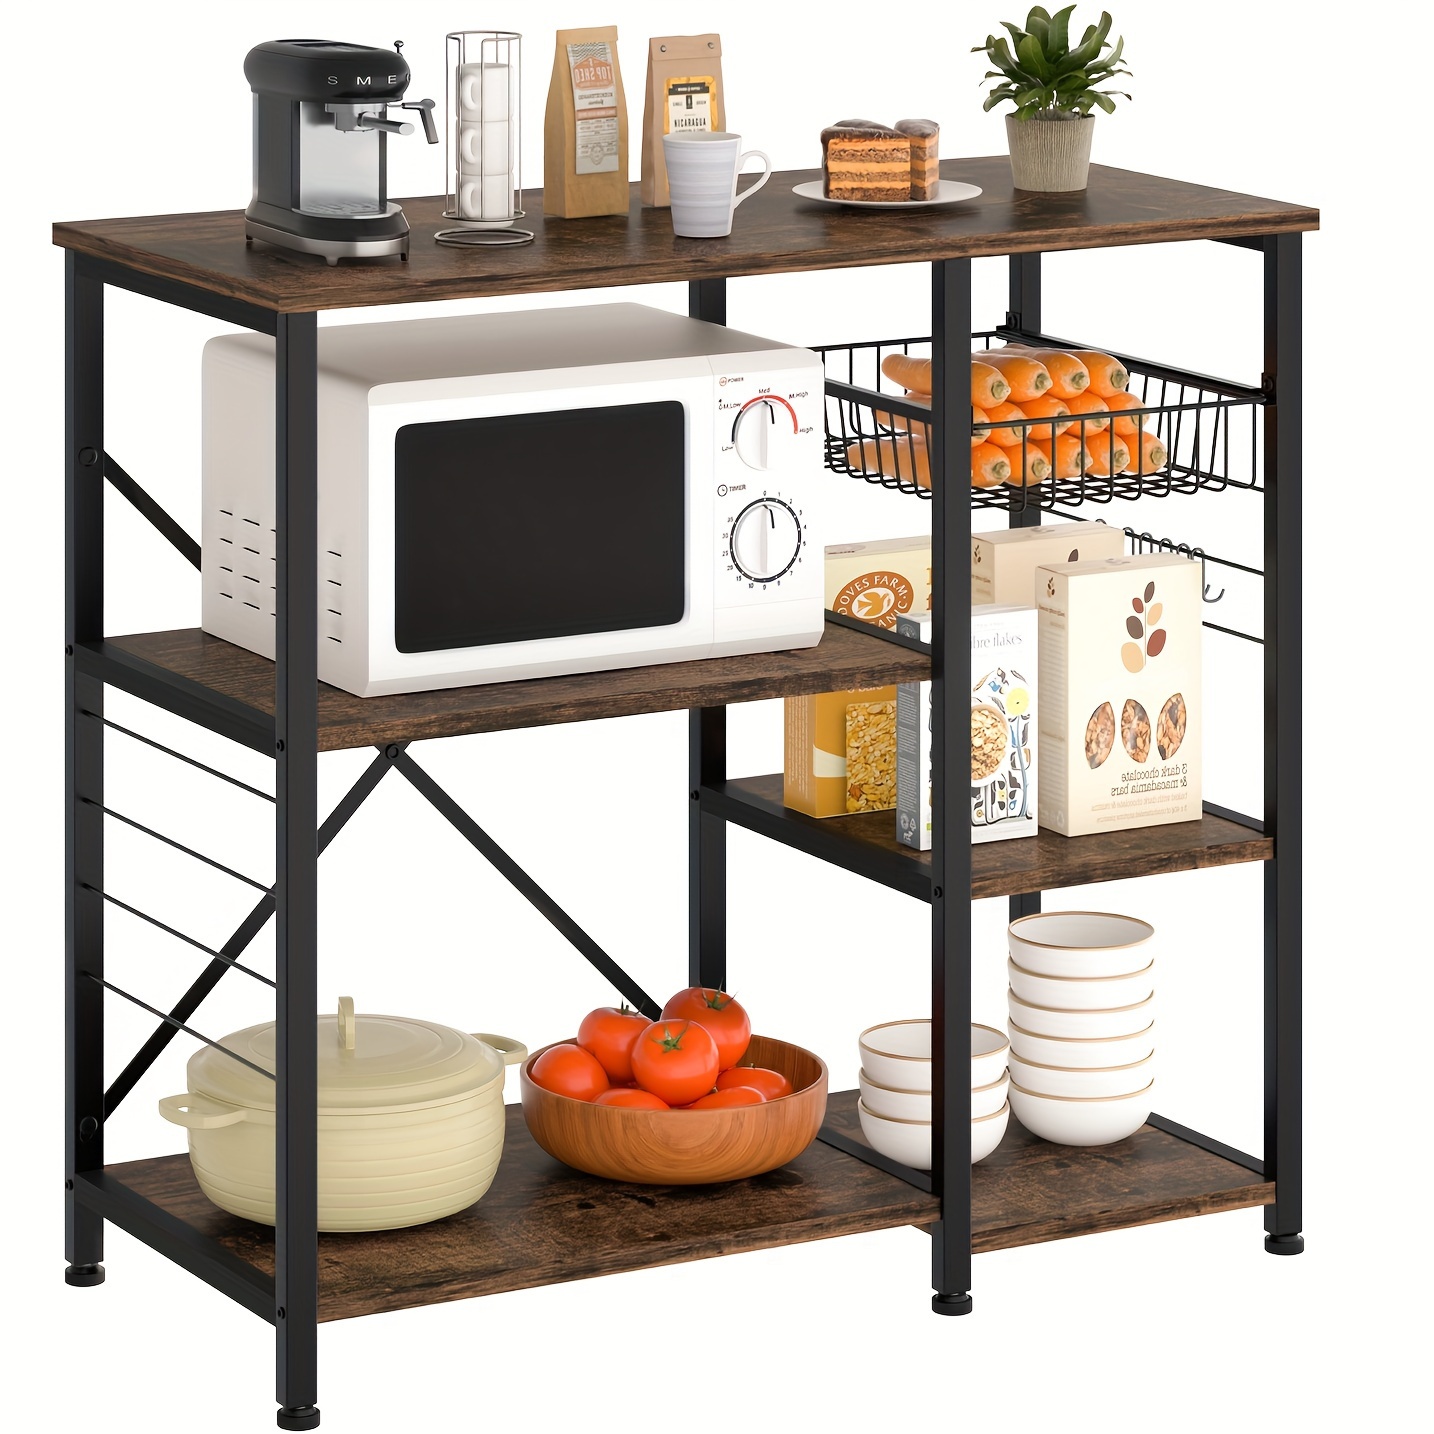 

Jamfly Kitchen Bakers Rack, Microwave Stand, Coffee Bar With Wire Basket, 5 Tier Kitchen Oven Stand, Kitchen Storage Shelf With 6 S-hooks, For Living Room, Spice, Pots And Pans Organizer